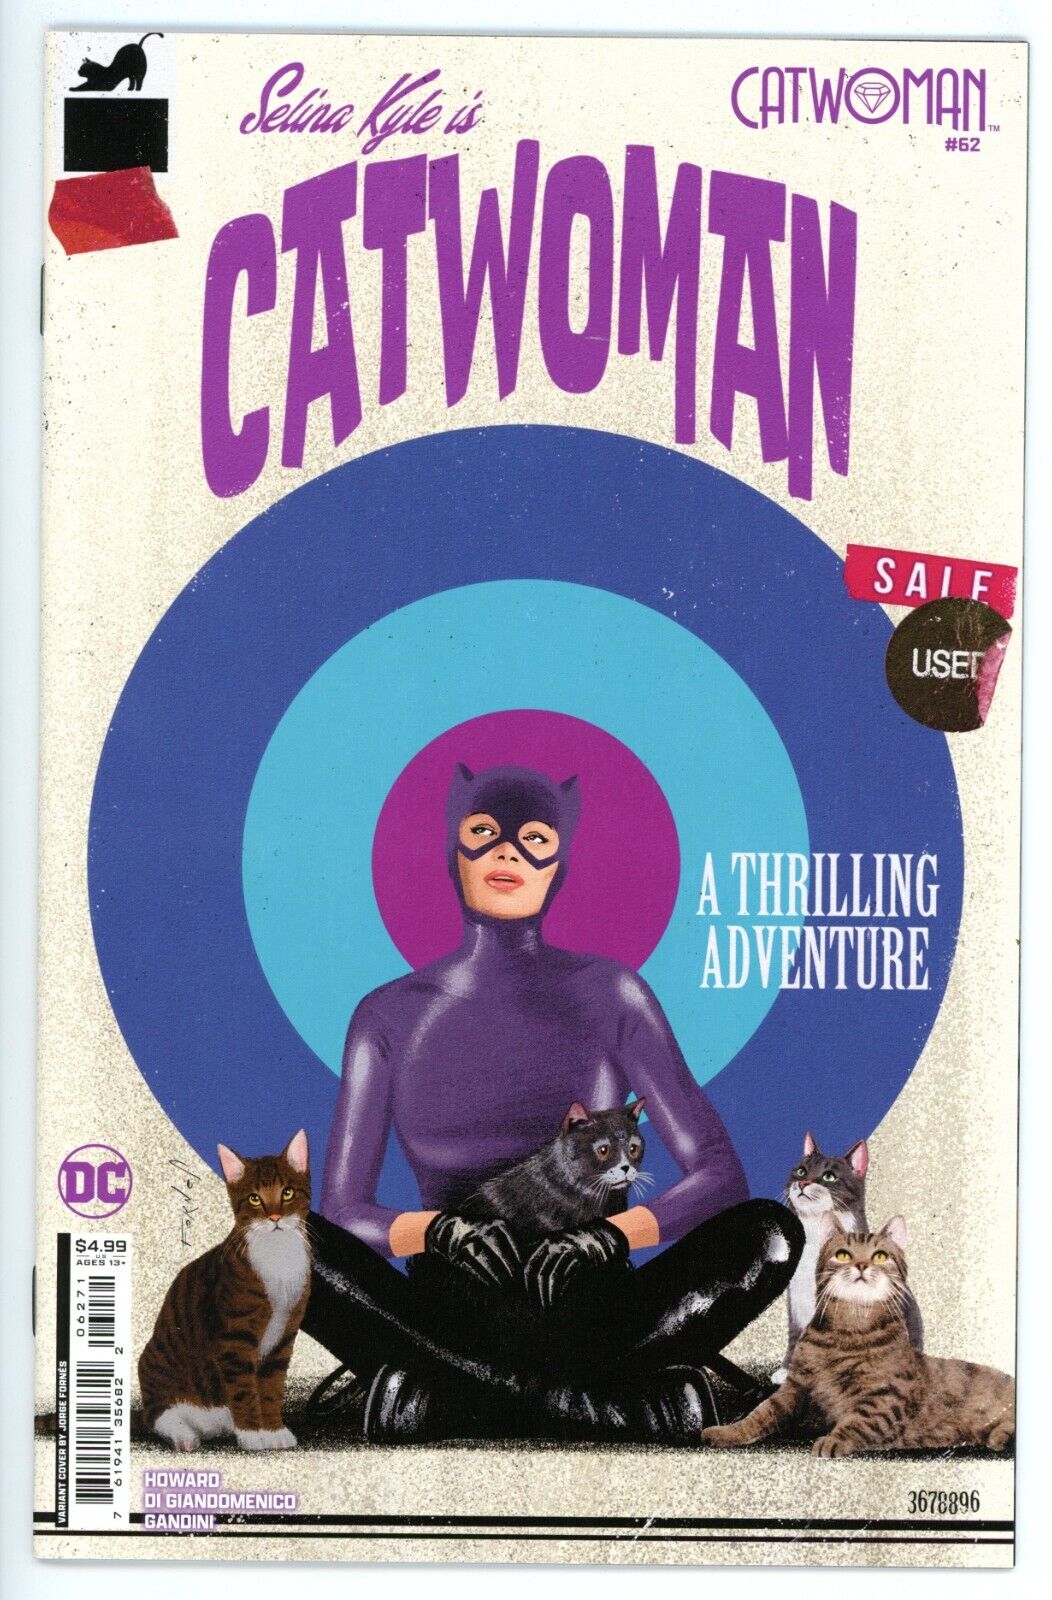 Catwoman #62  . Cover F .  Card Stock Variant  .    NM  NEW  🟥NO STOCK PHOTOS🟥